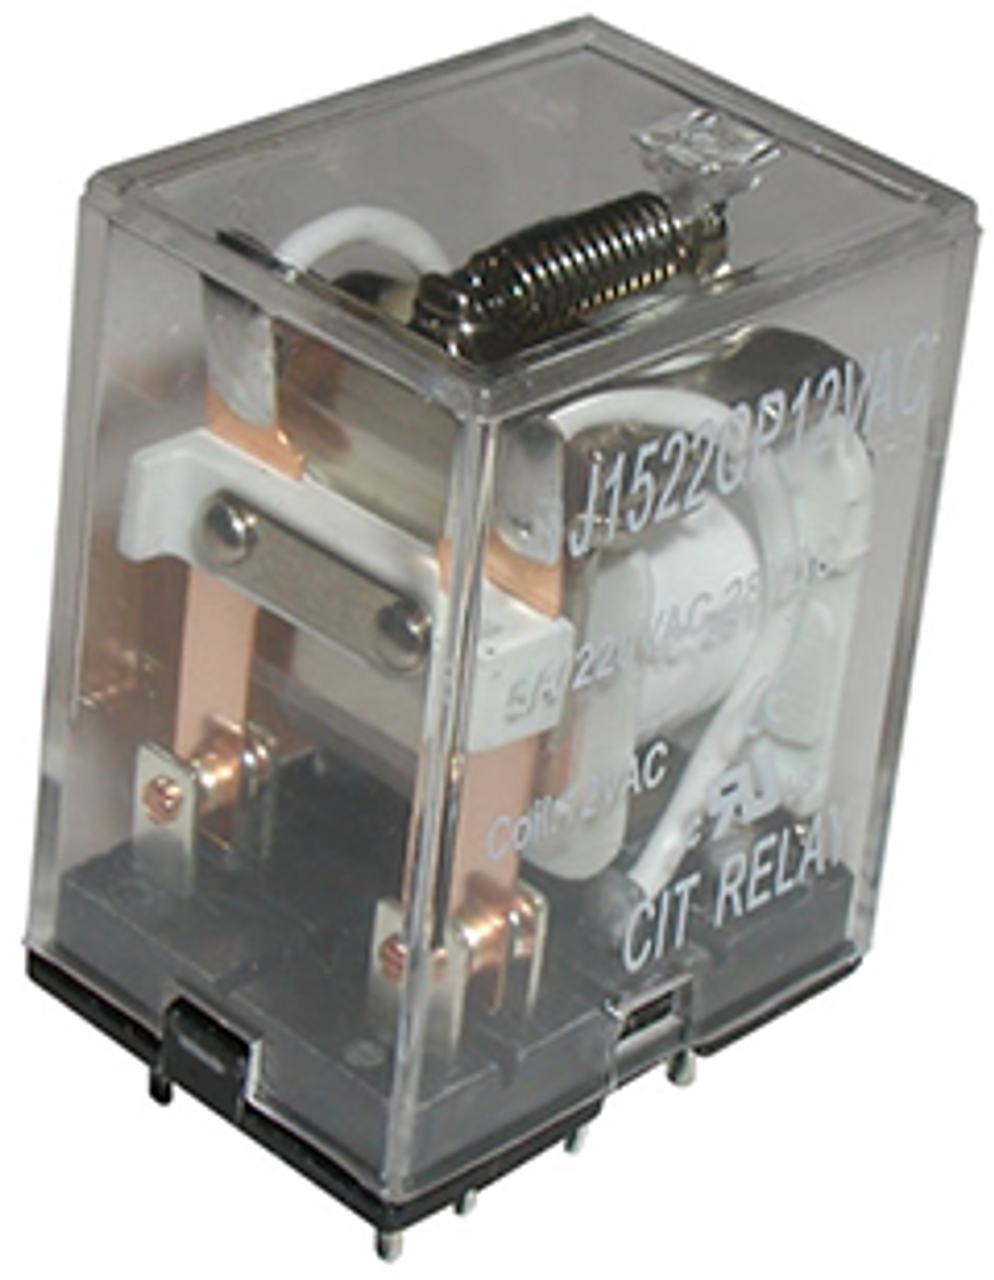 CIT Relay and Switch J1522CT24VACD Industrial Relays